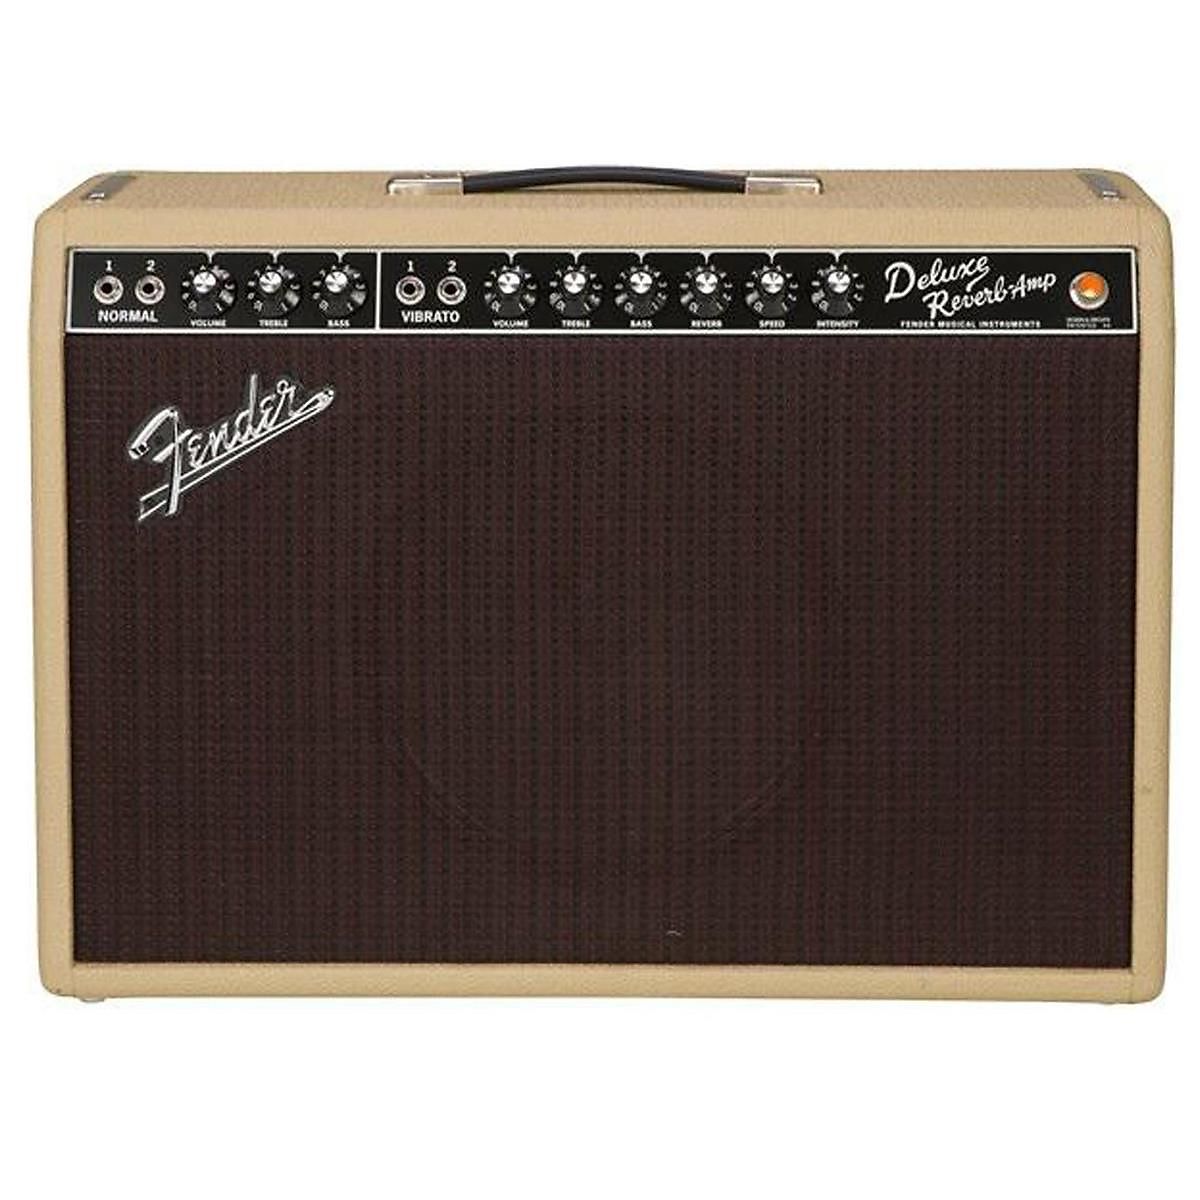 Fender Limited Edition '65 Deluxe Reverb 22-Watt 1x12 | Reverb Canada